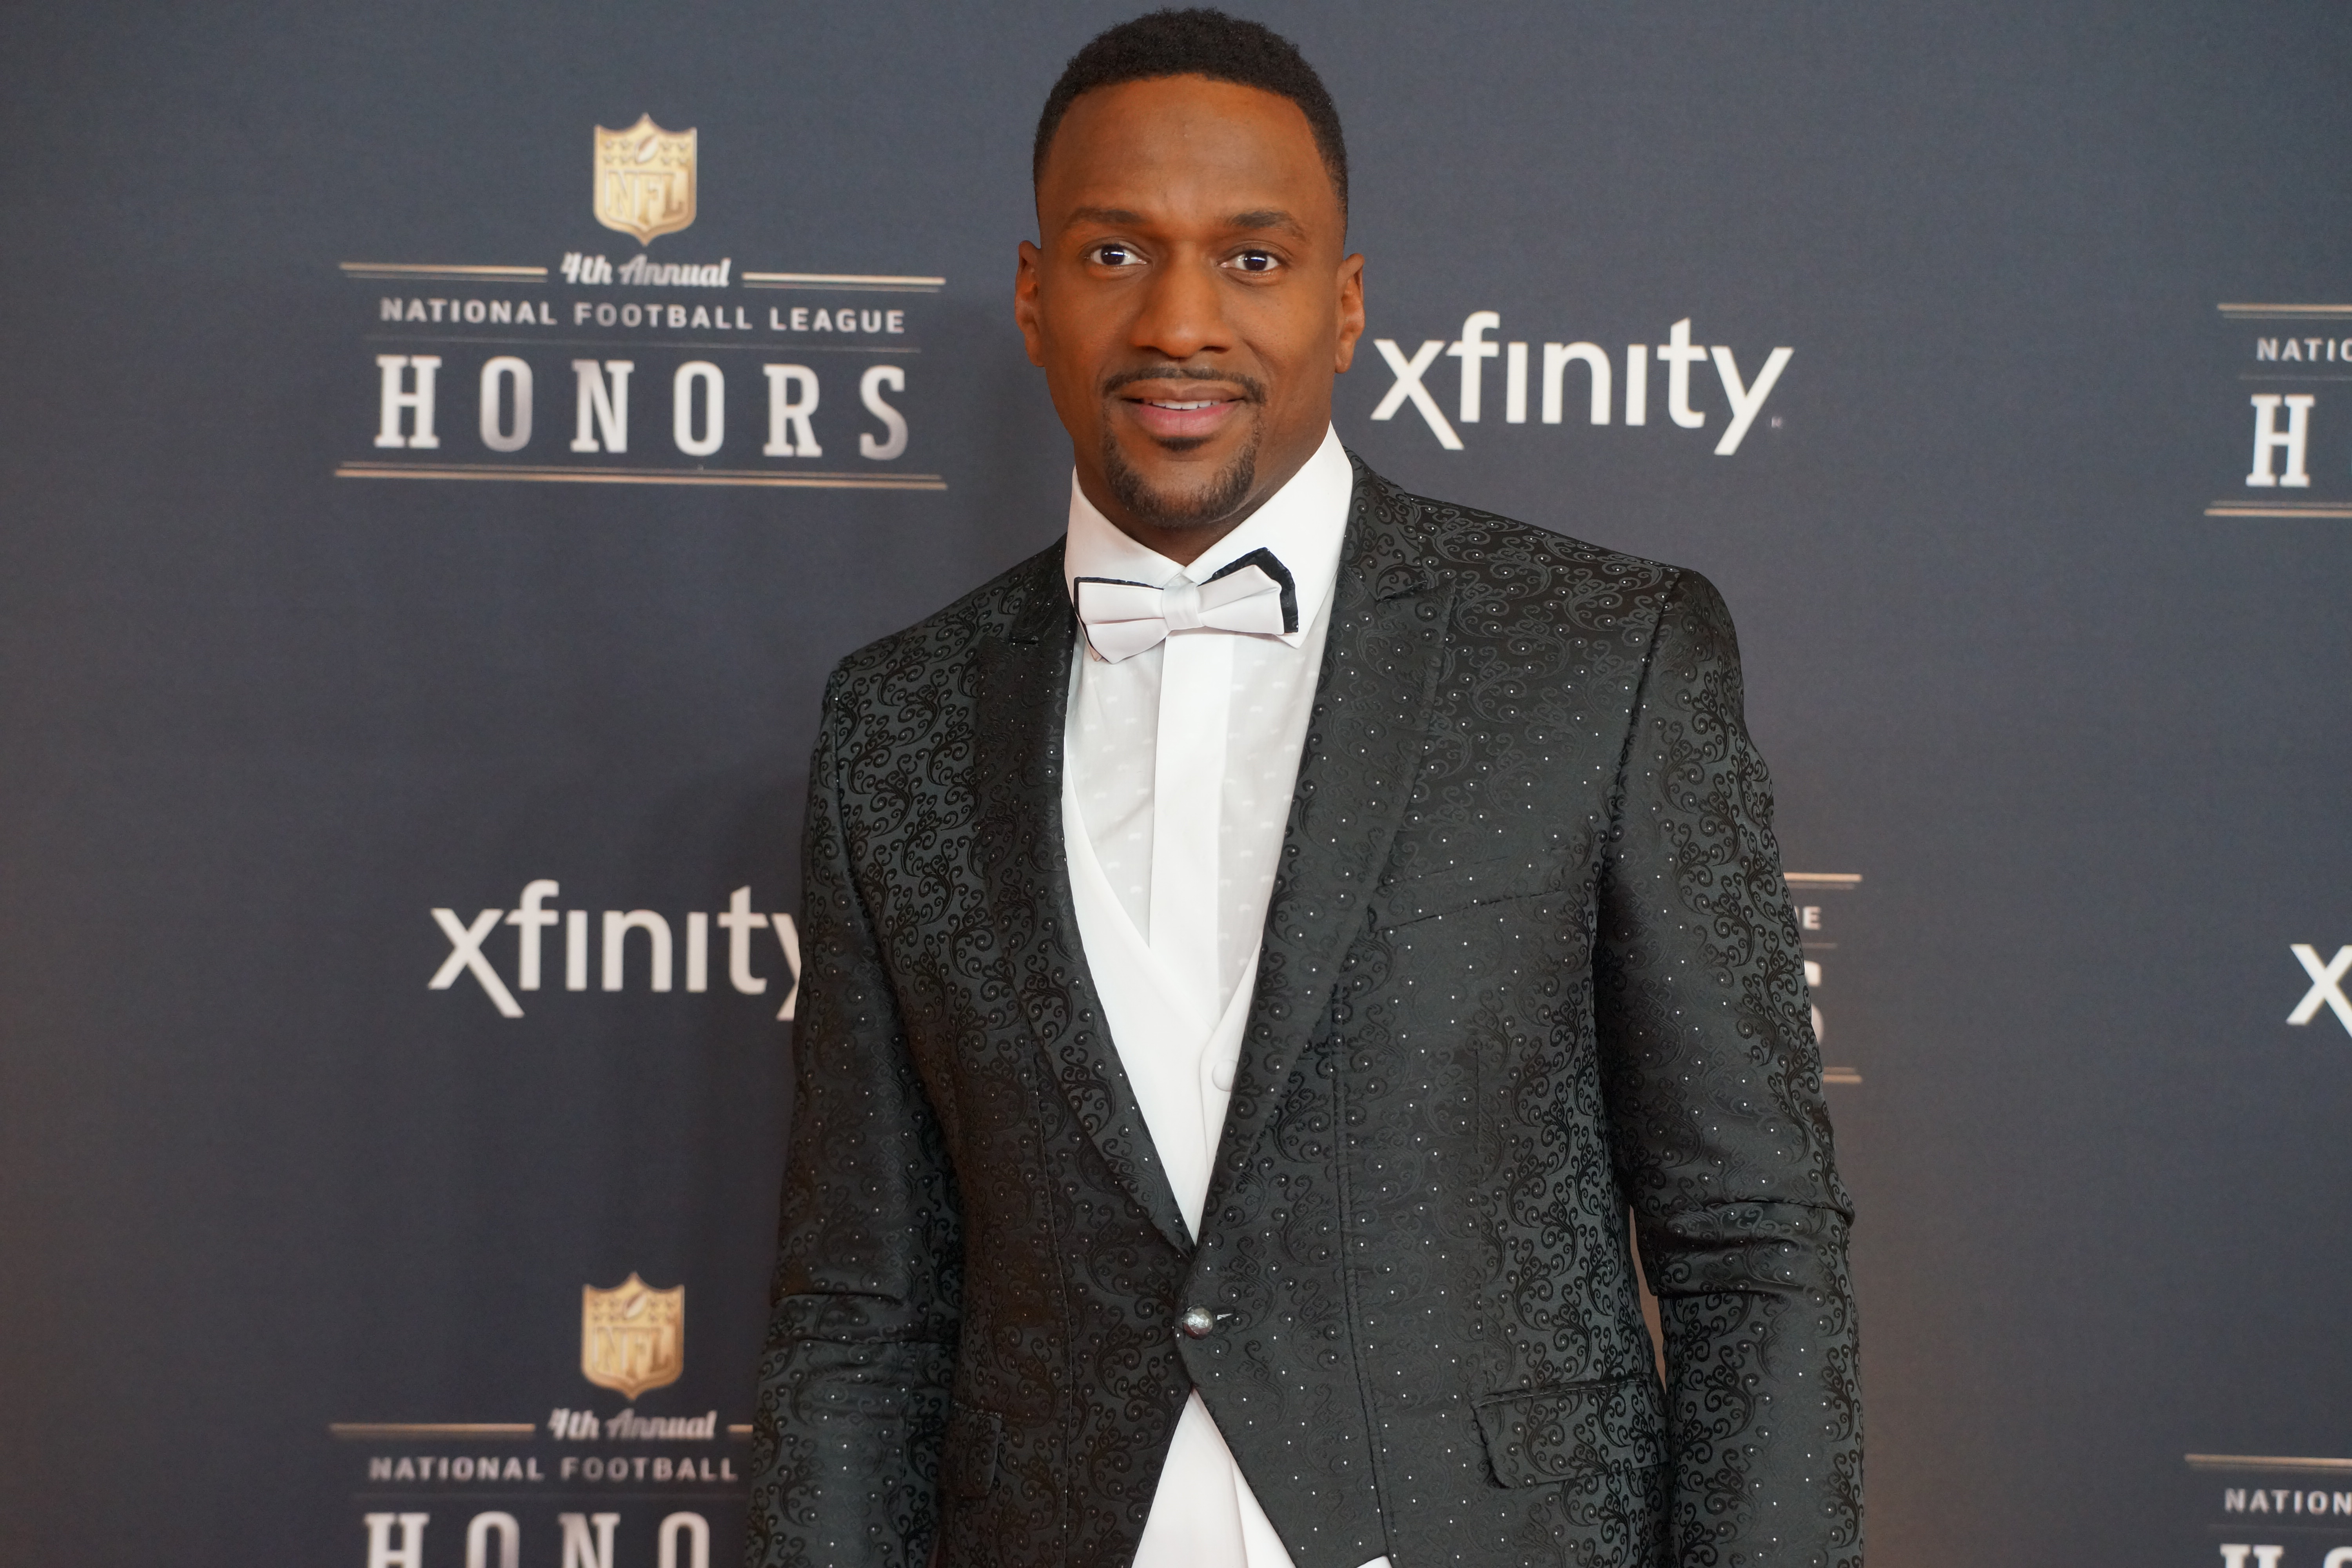 Jordan Babineaux on the Red Carpet at the 2015 NFL Honors Awards Show.